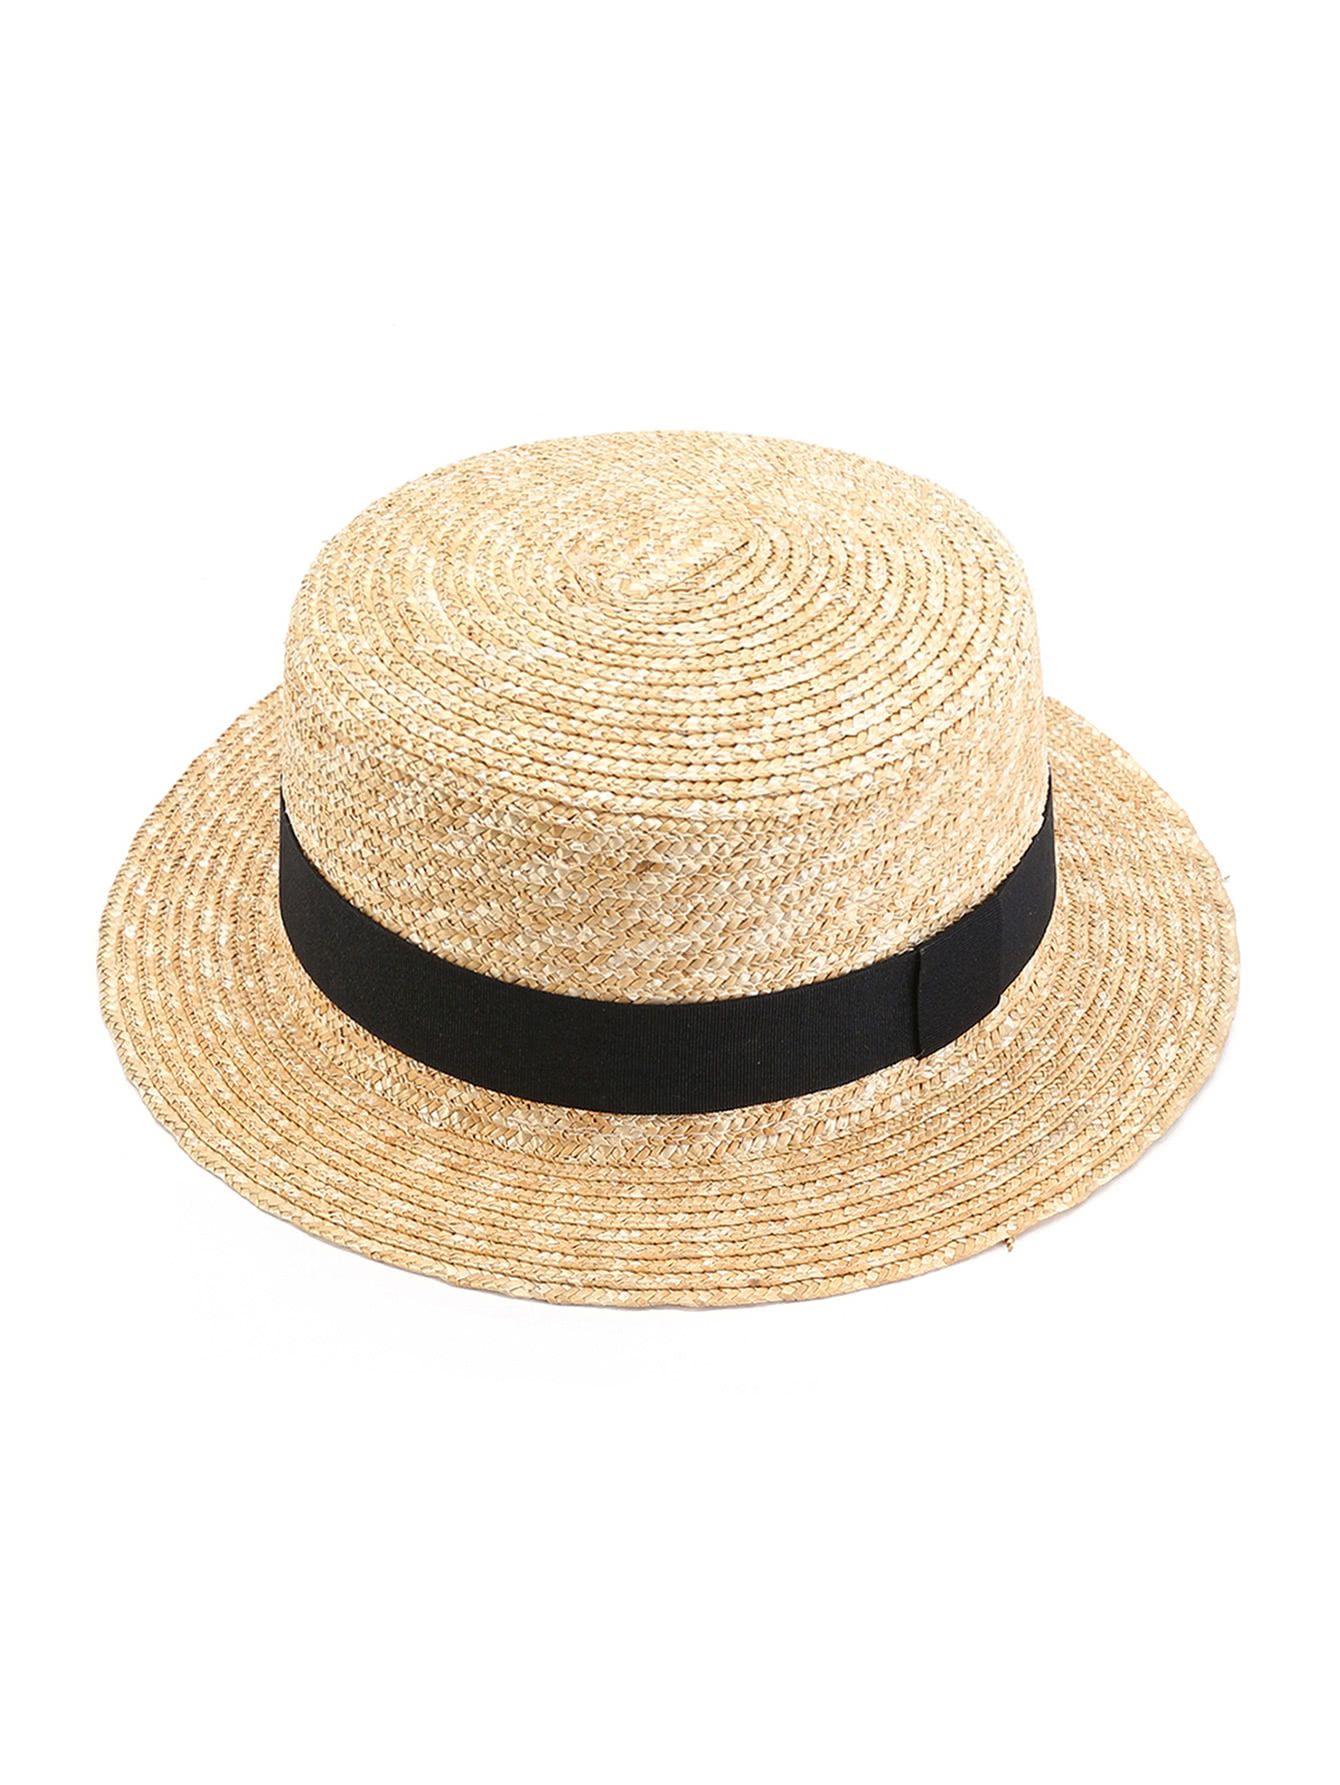 Contrast Band Straw Boater Hat | ROMWE